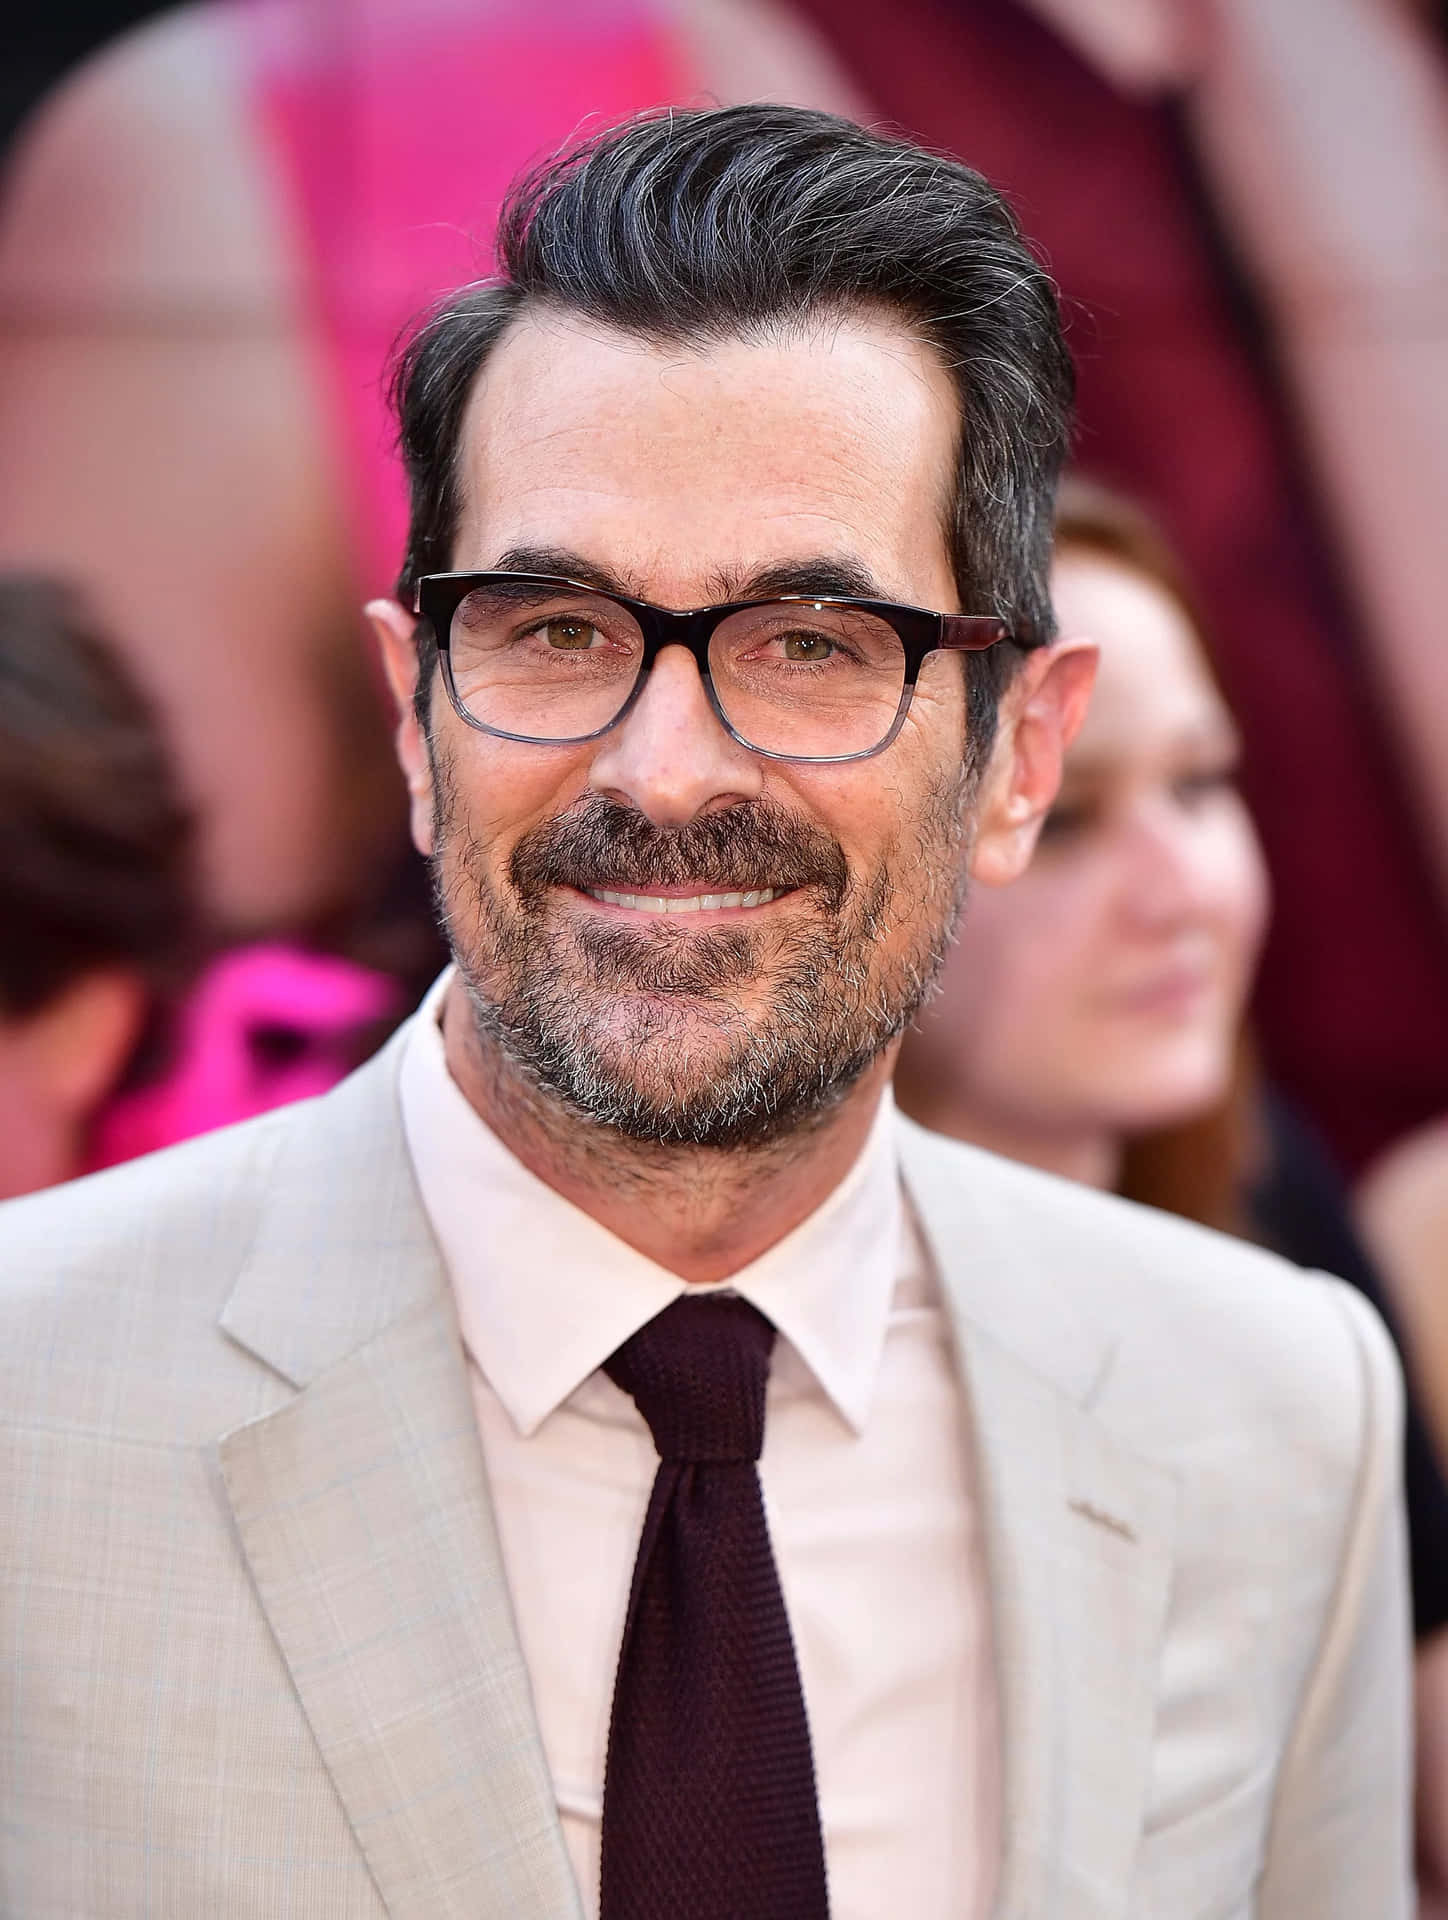 Ty Burrell Smiling at an Event Wallpaper